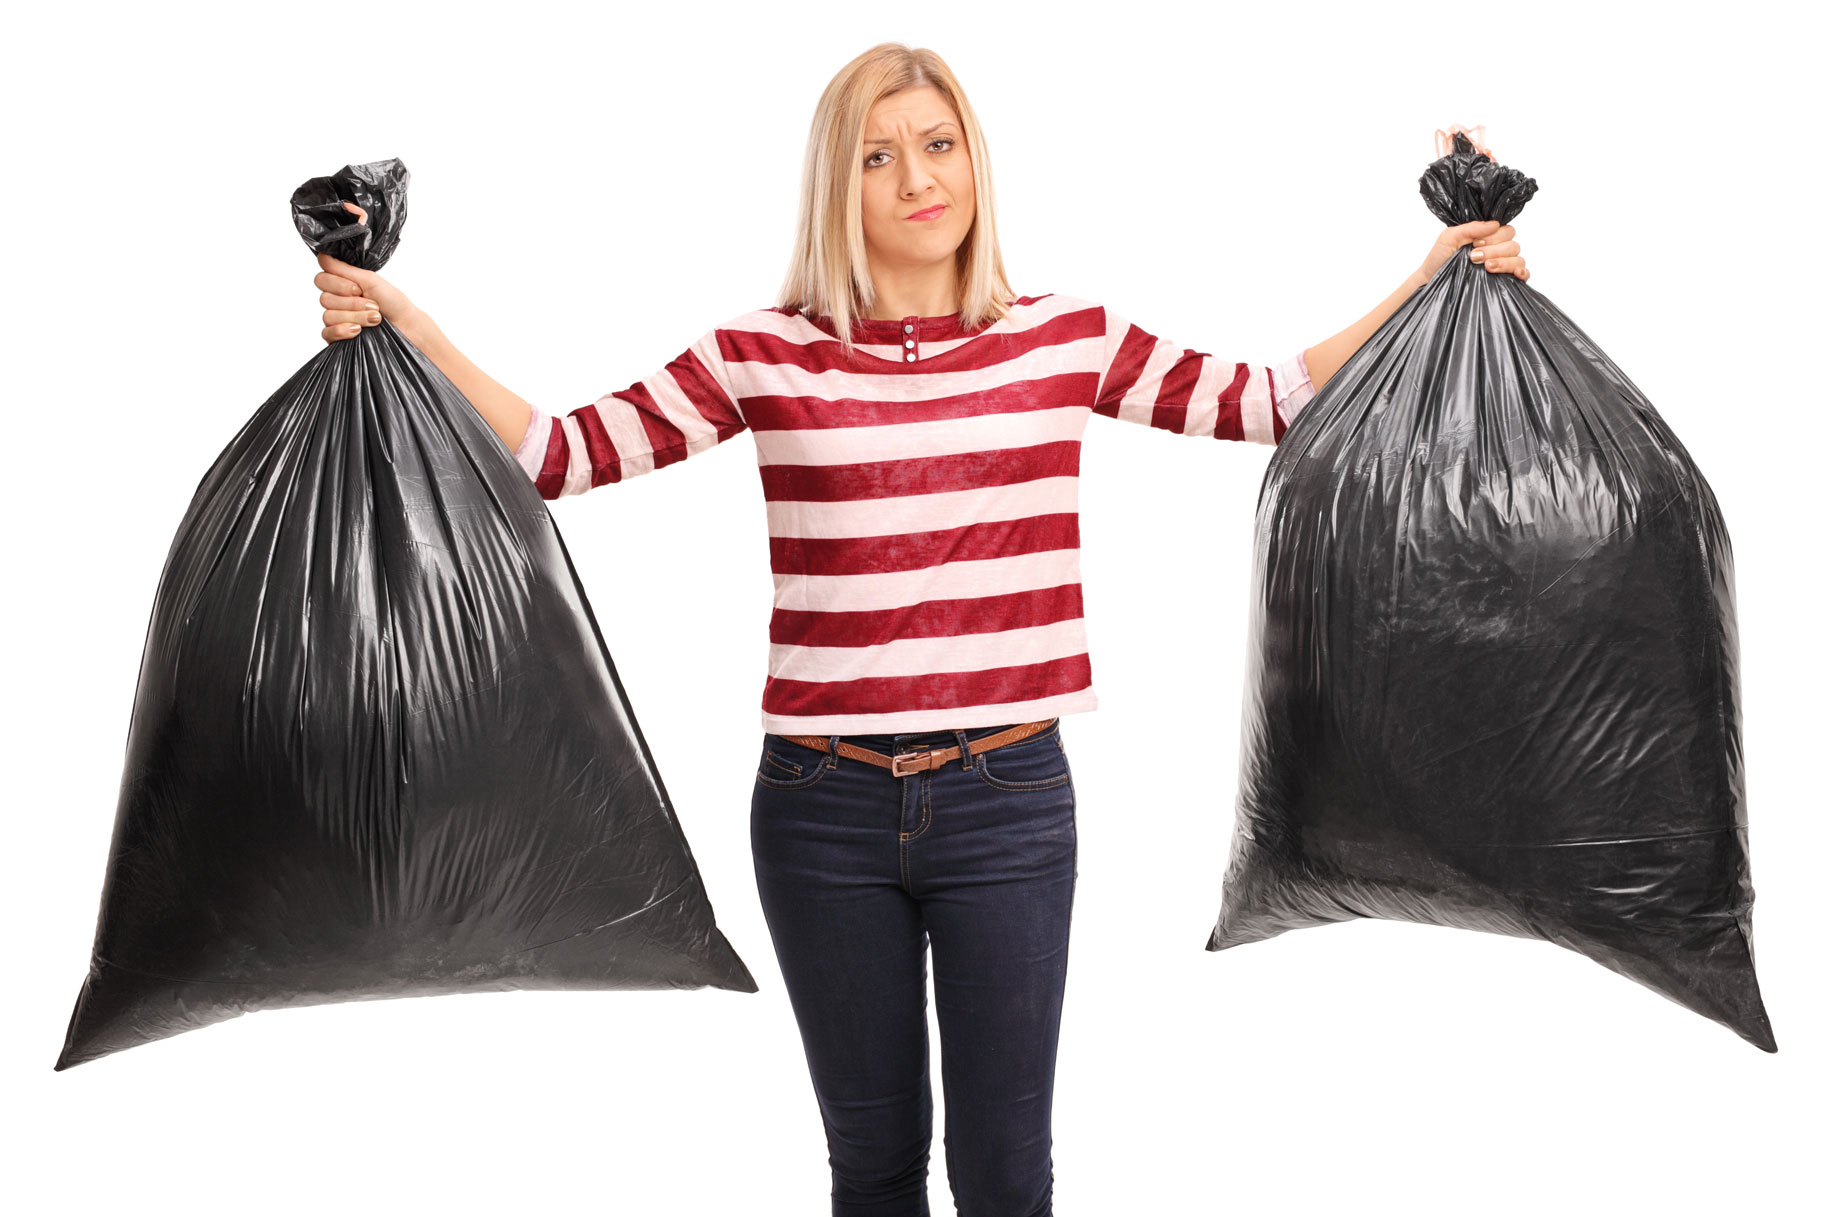 How to Make Doing the Garbage Less Gross